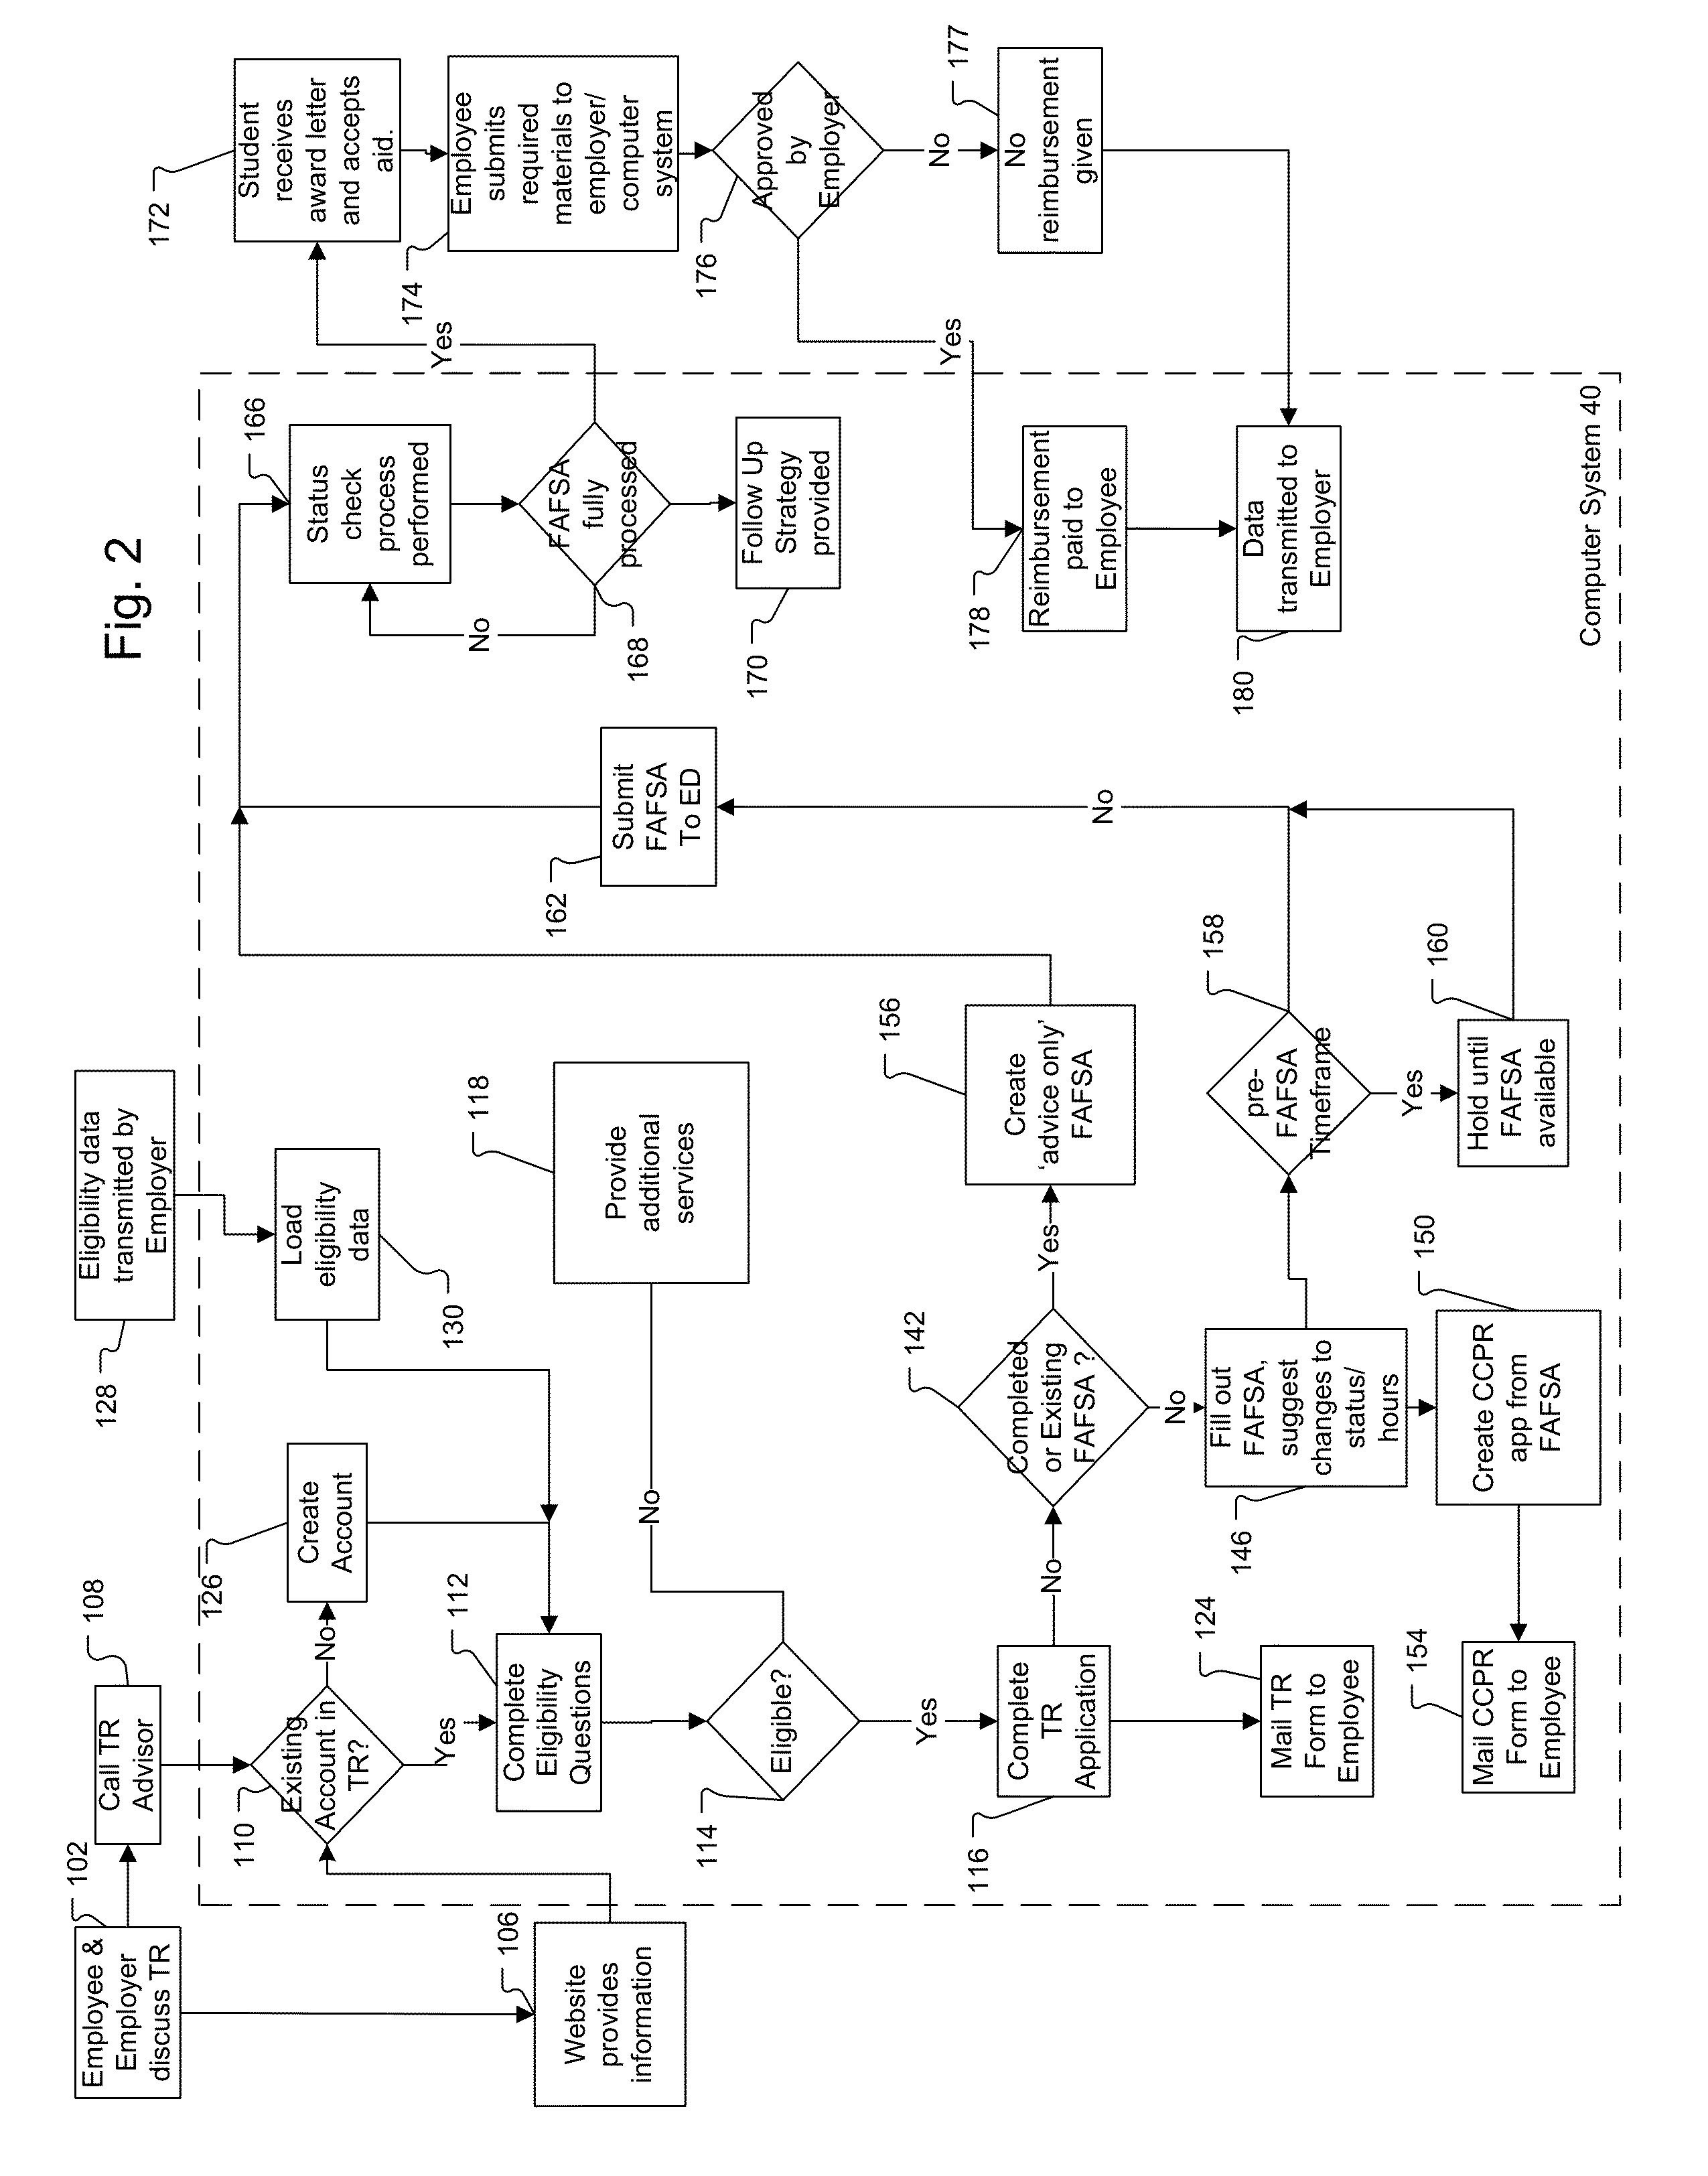 Computer System for Managing, Assessing, and Optimizing Tuition Reimbursement and Method of its Operation